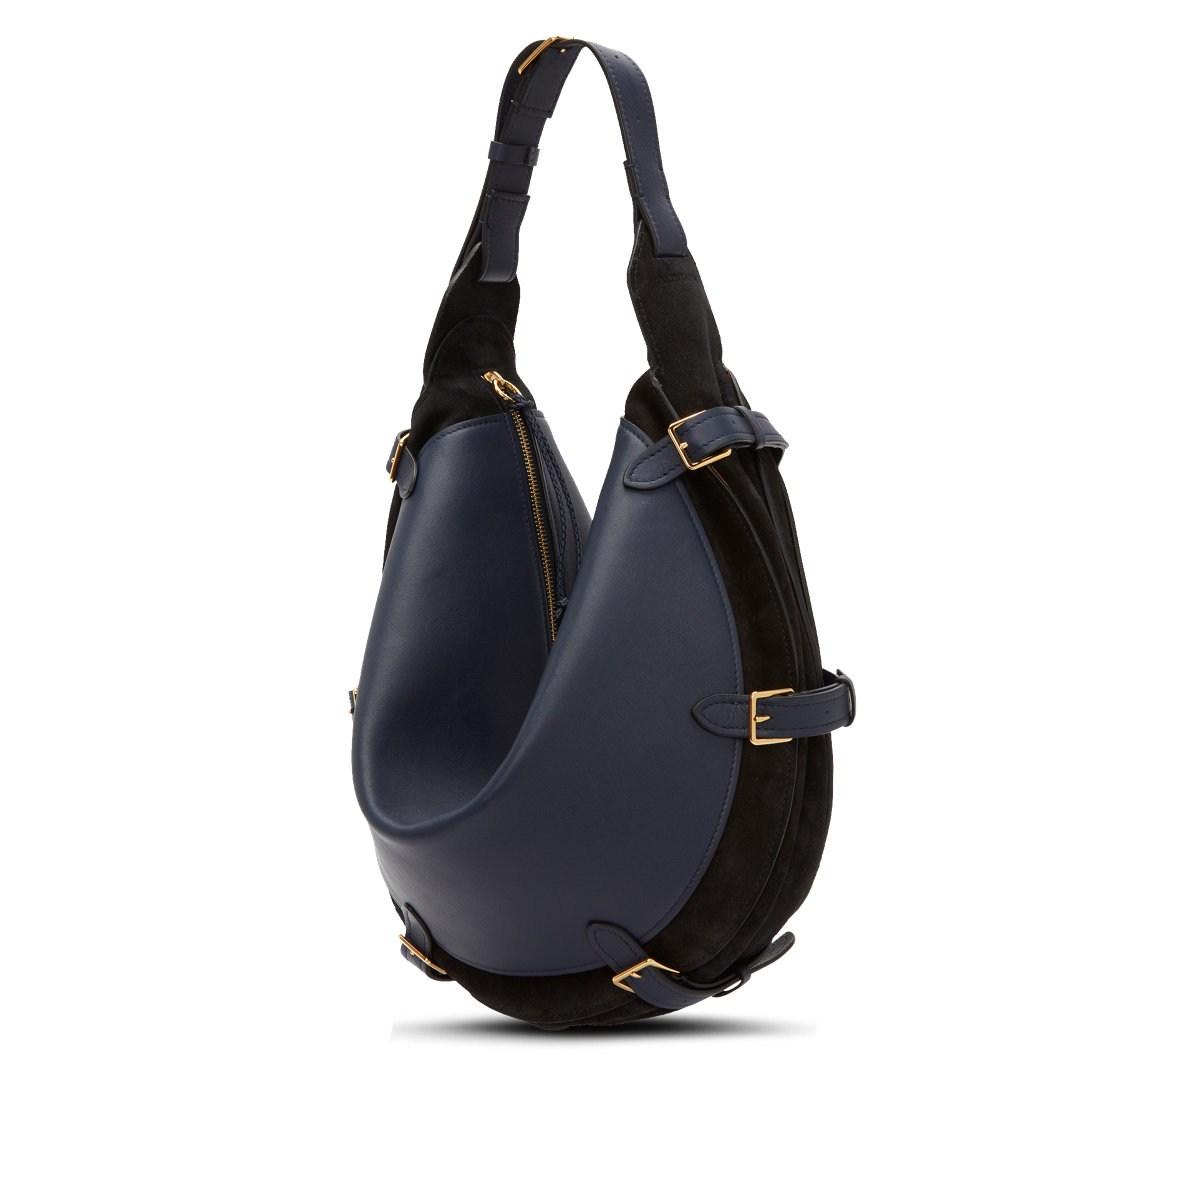 Altuzarra Play Small Leather & Suede Hobo Bag - Lyst